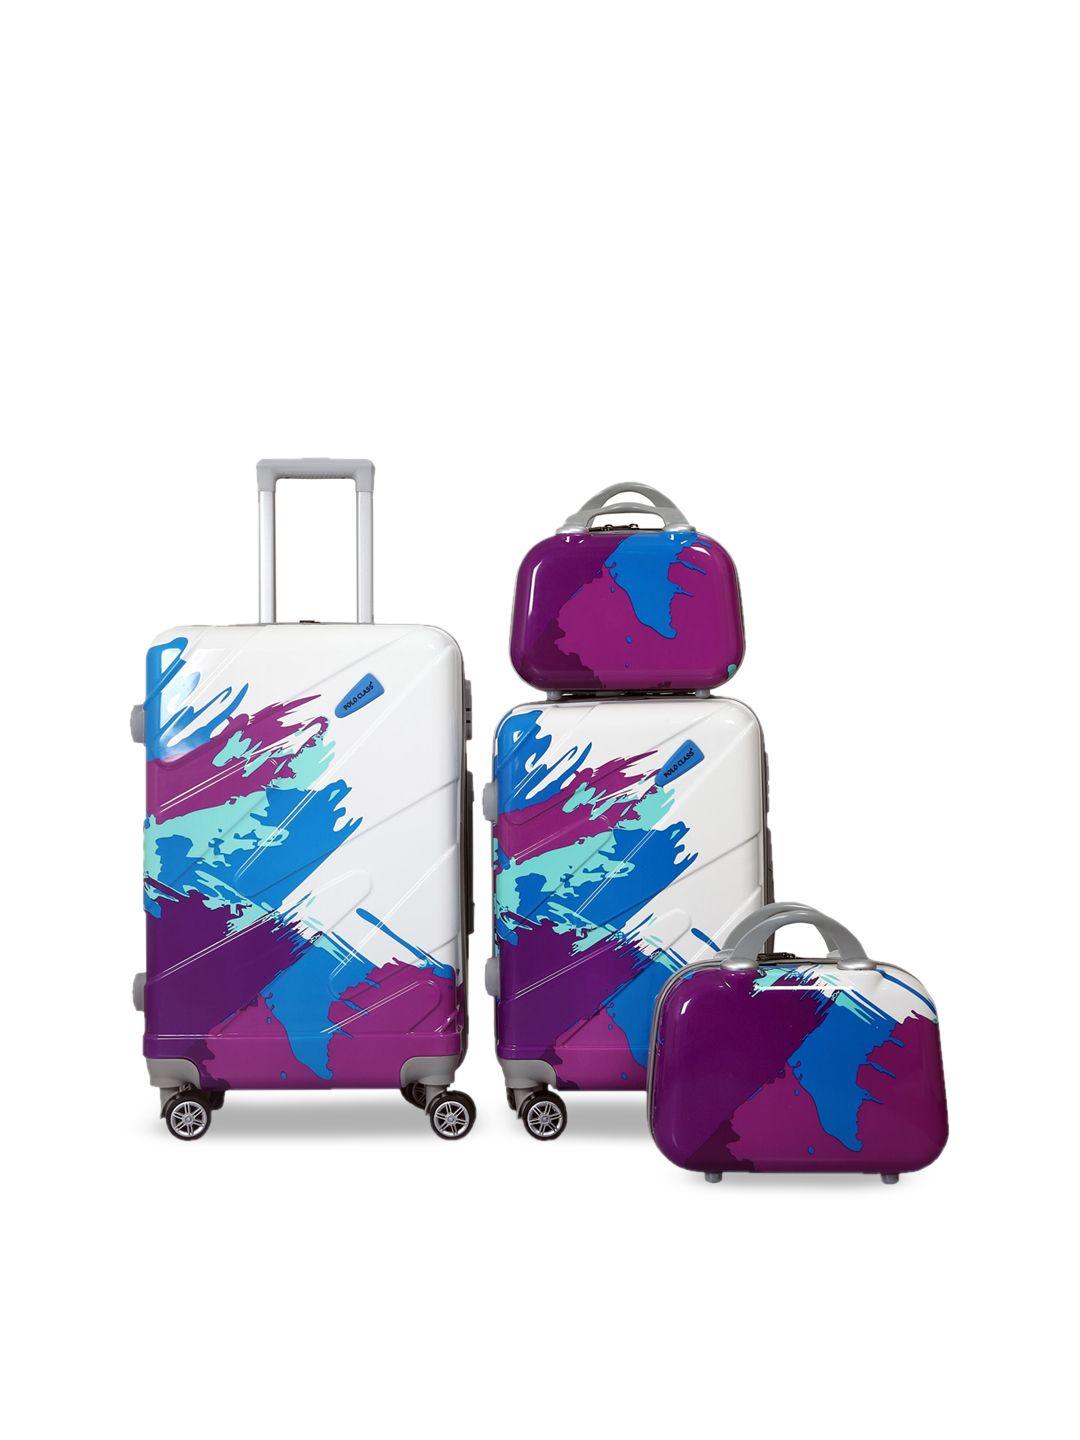 polo class set of 4 printed hard case luggage trolley & vanity bag